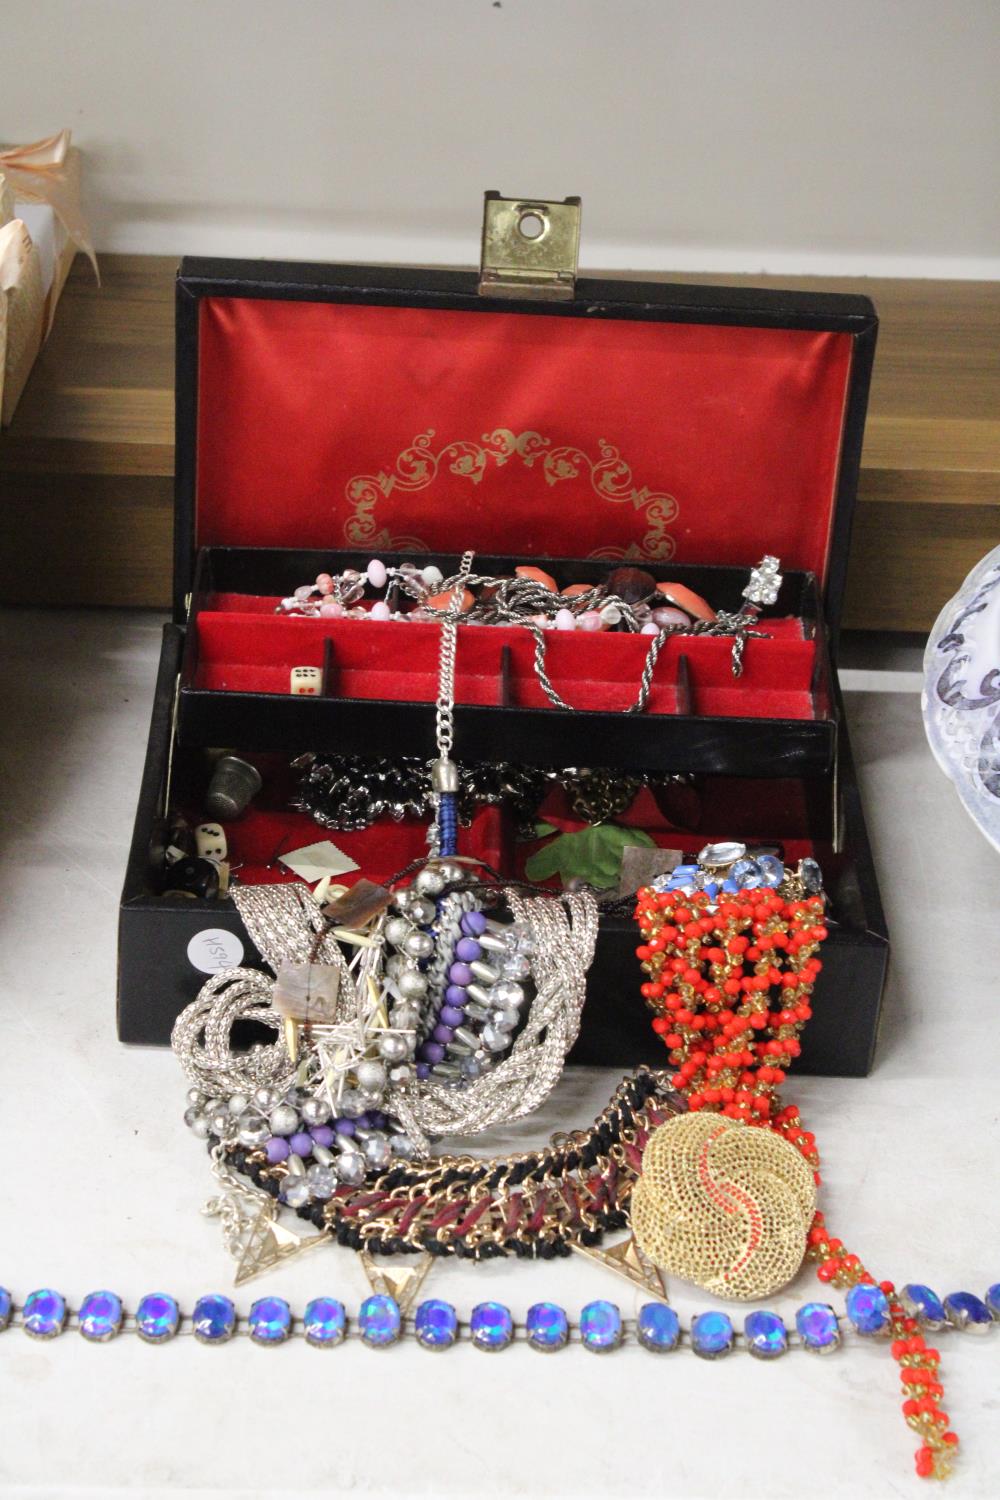 A QUANTITY OF COSTUME JEWELLERY TO INCLUDE NECKLACES, ETC IN A BLACK JEWELLERY BOX WITH RED LINING